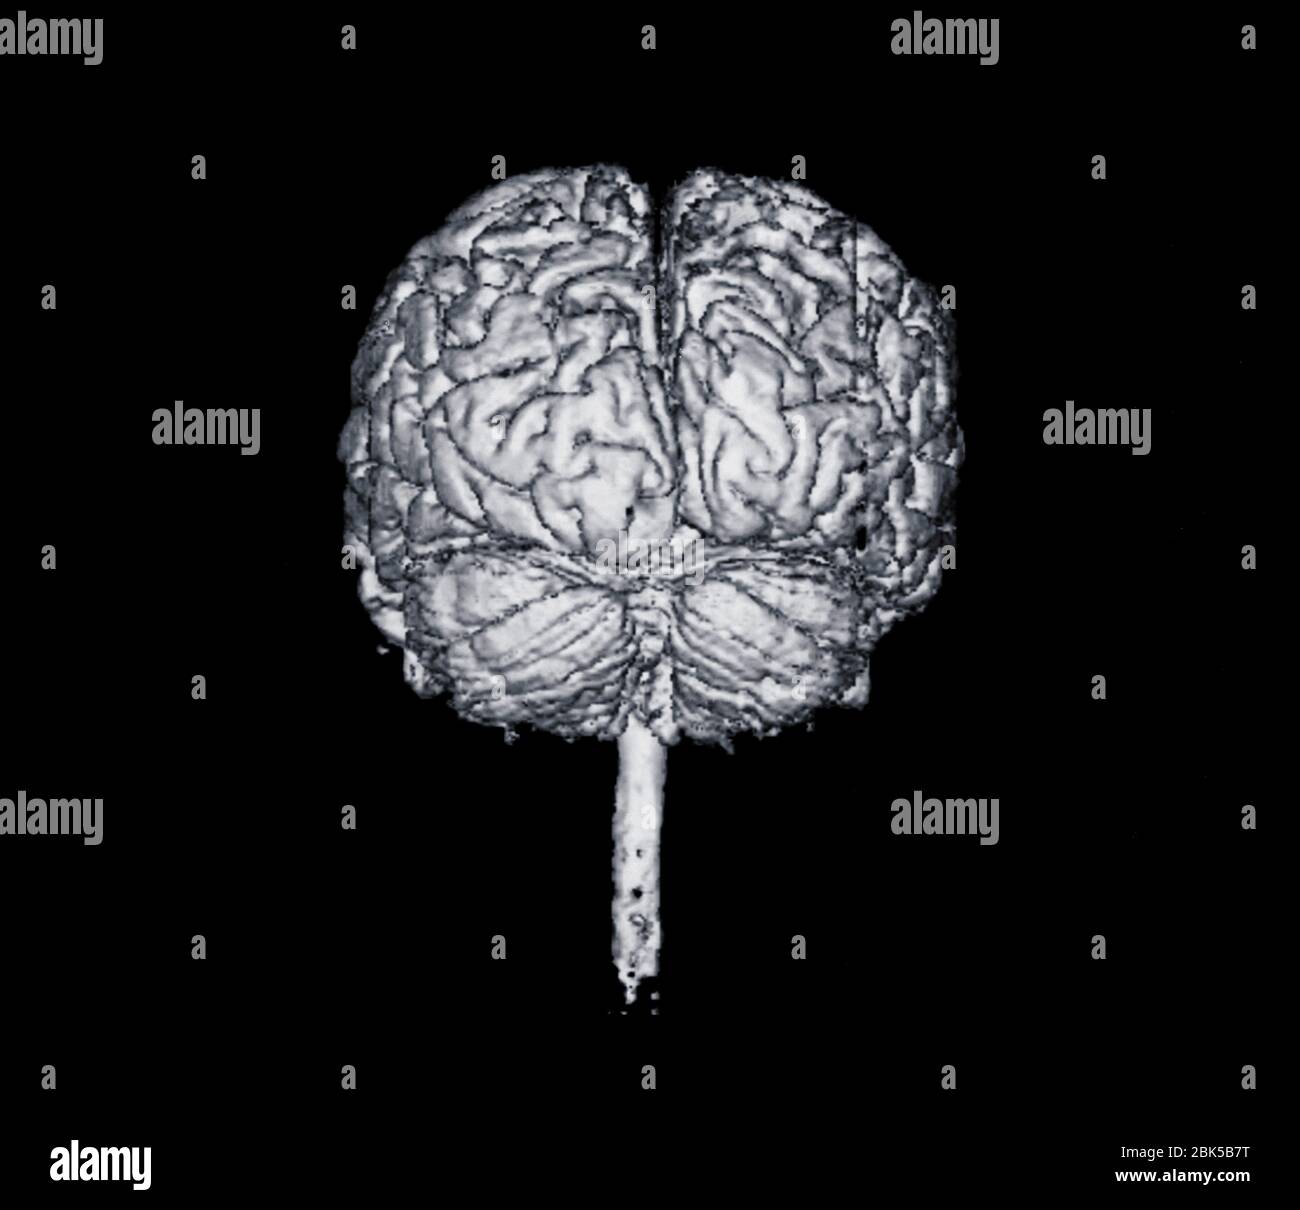 Front view of brain, X-ray. Stock Photo